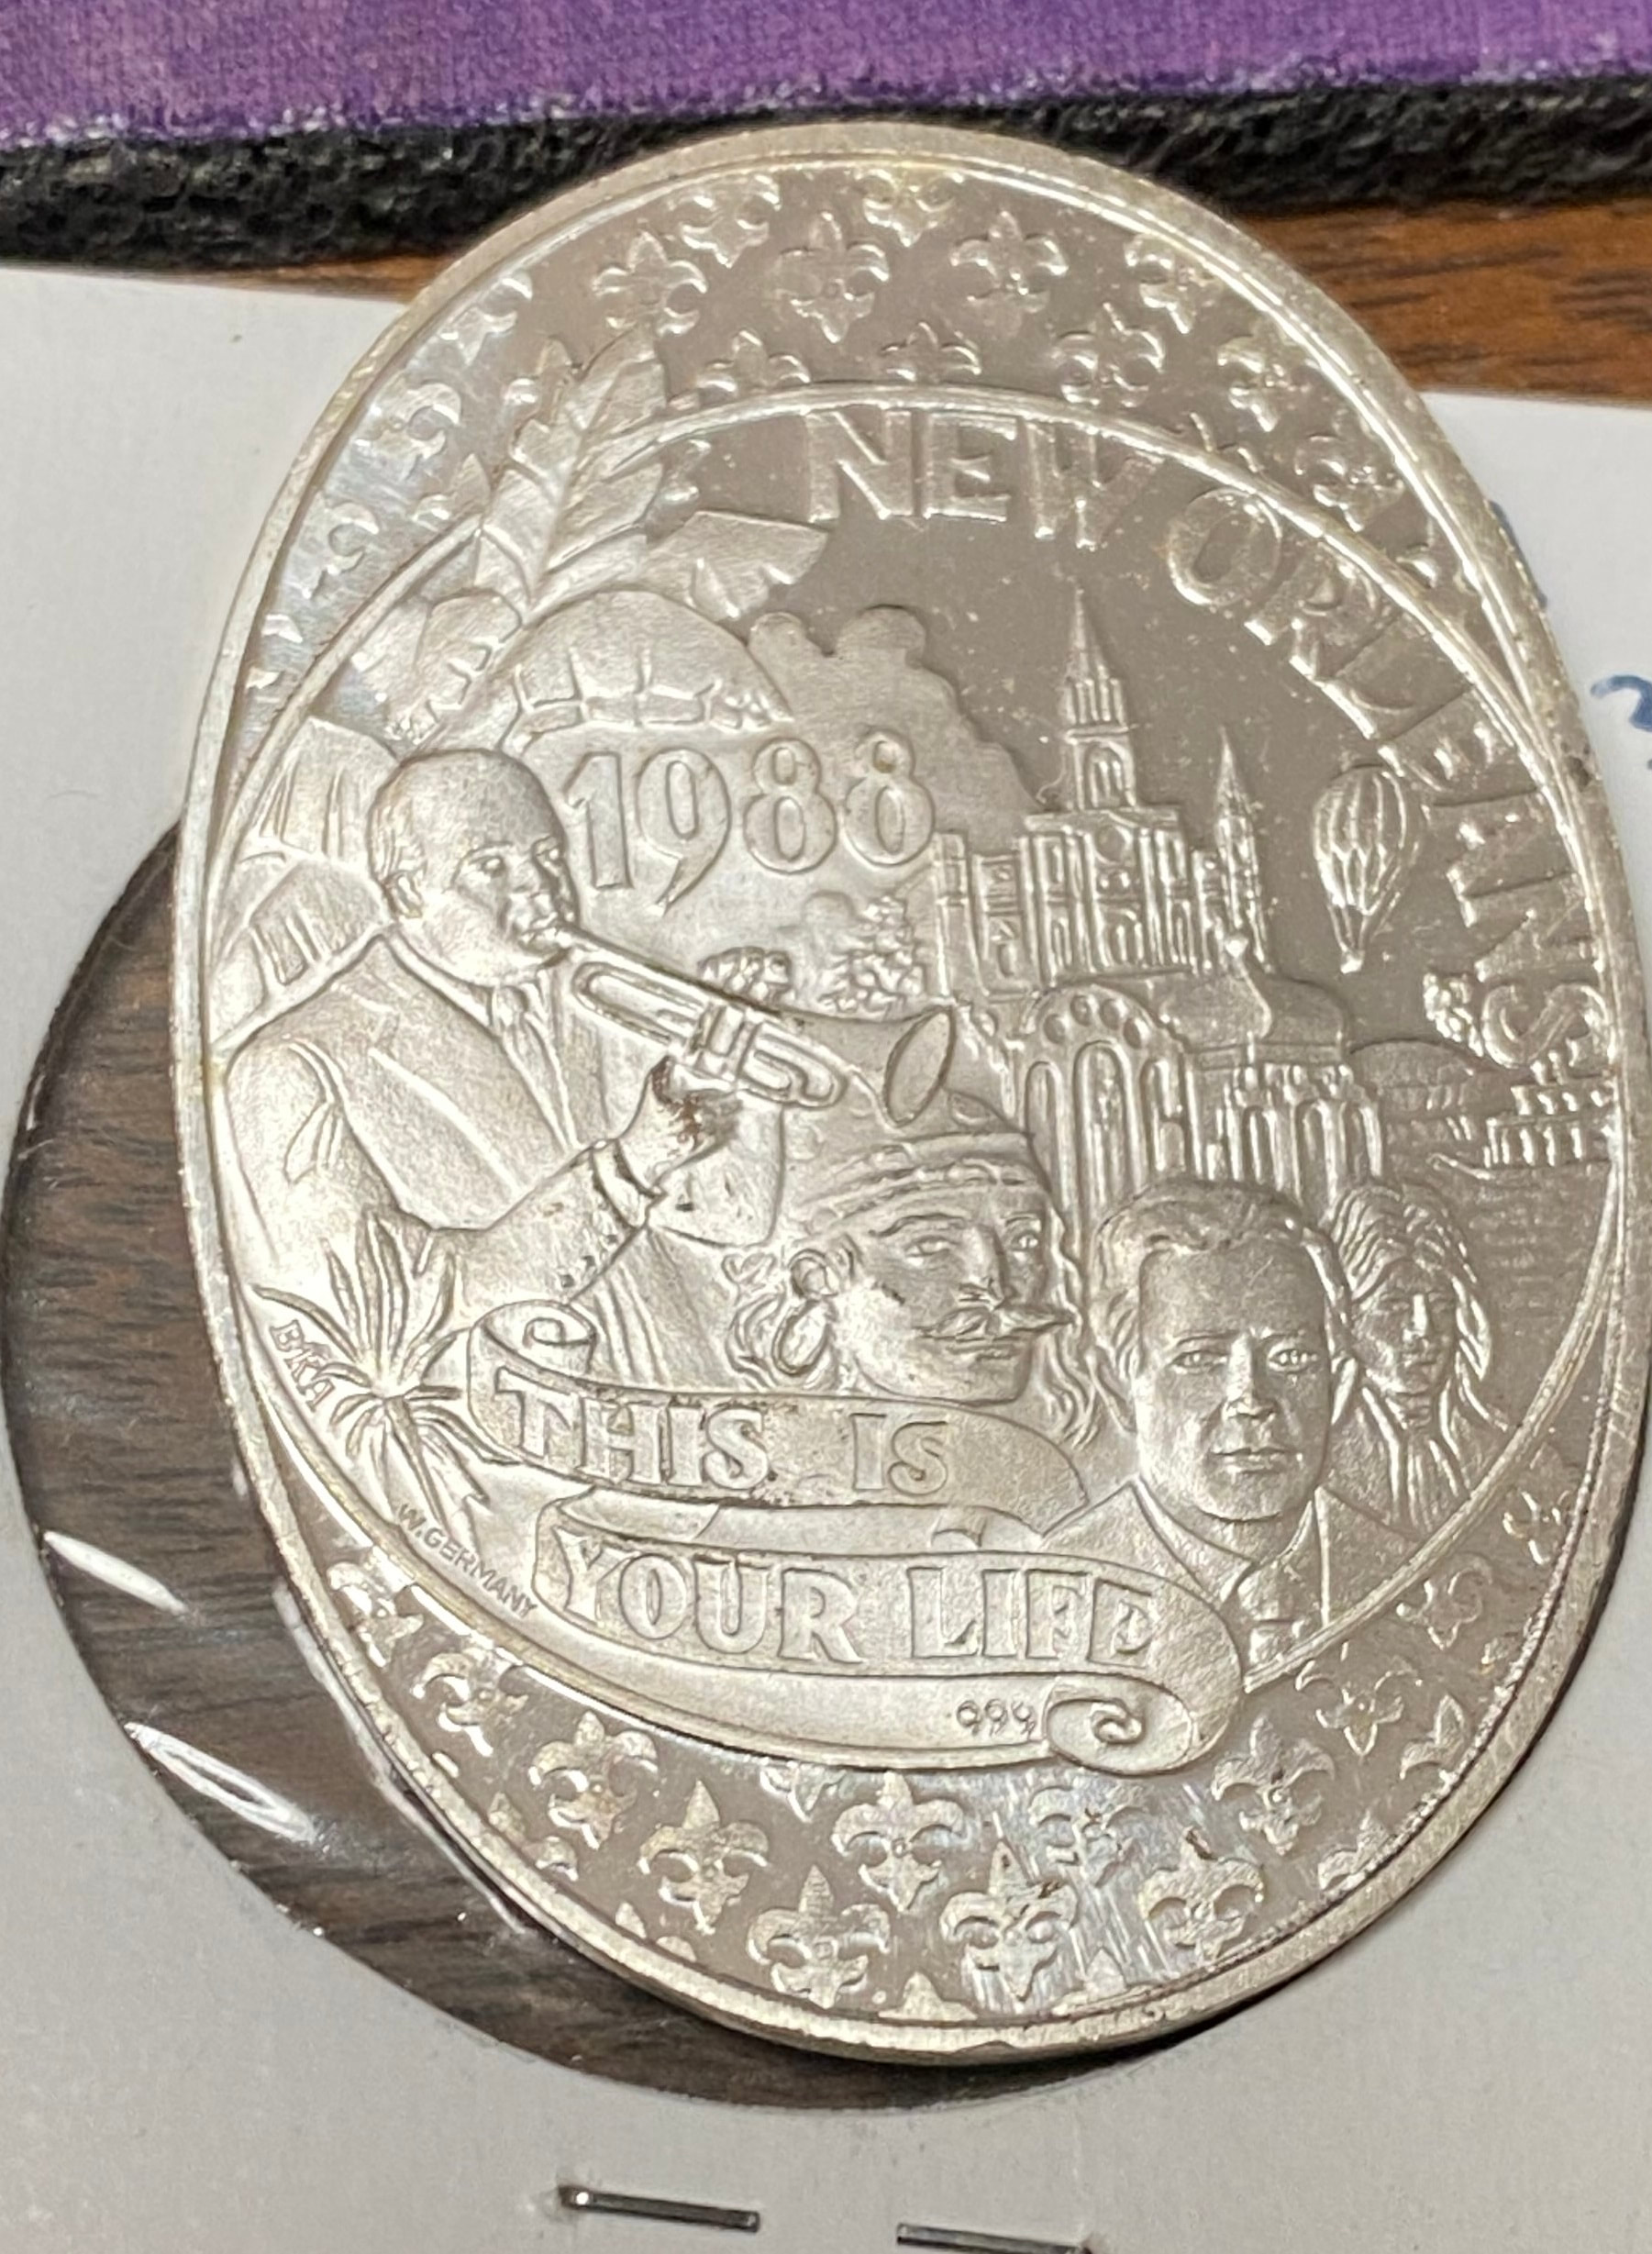 1982 Knights of KING ARTHUR 5th Ann brushed aluminum Mardi Gras Doubloon 